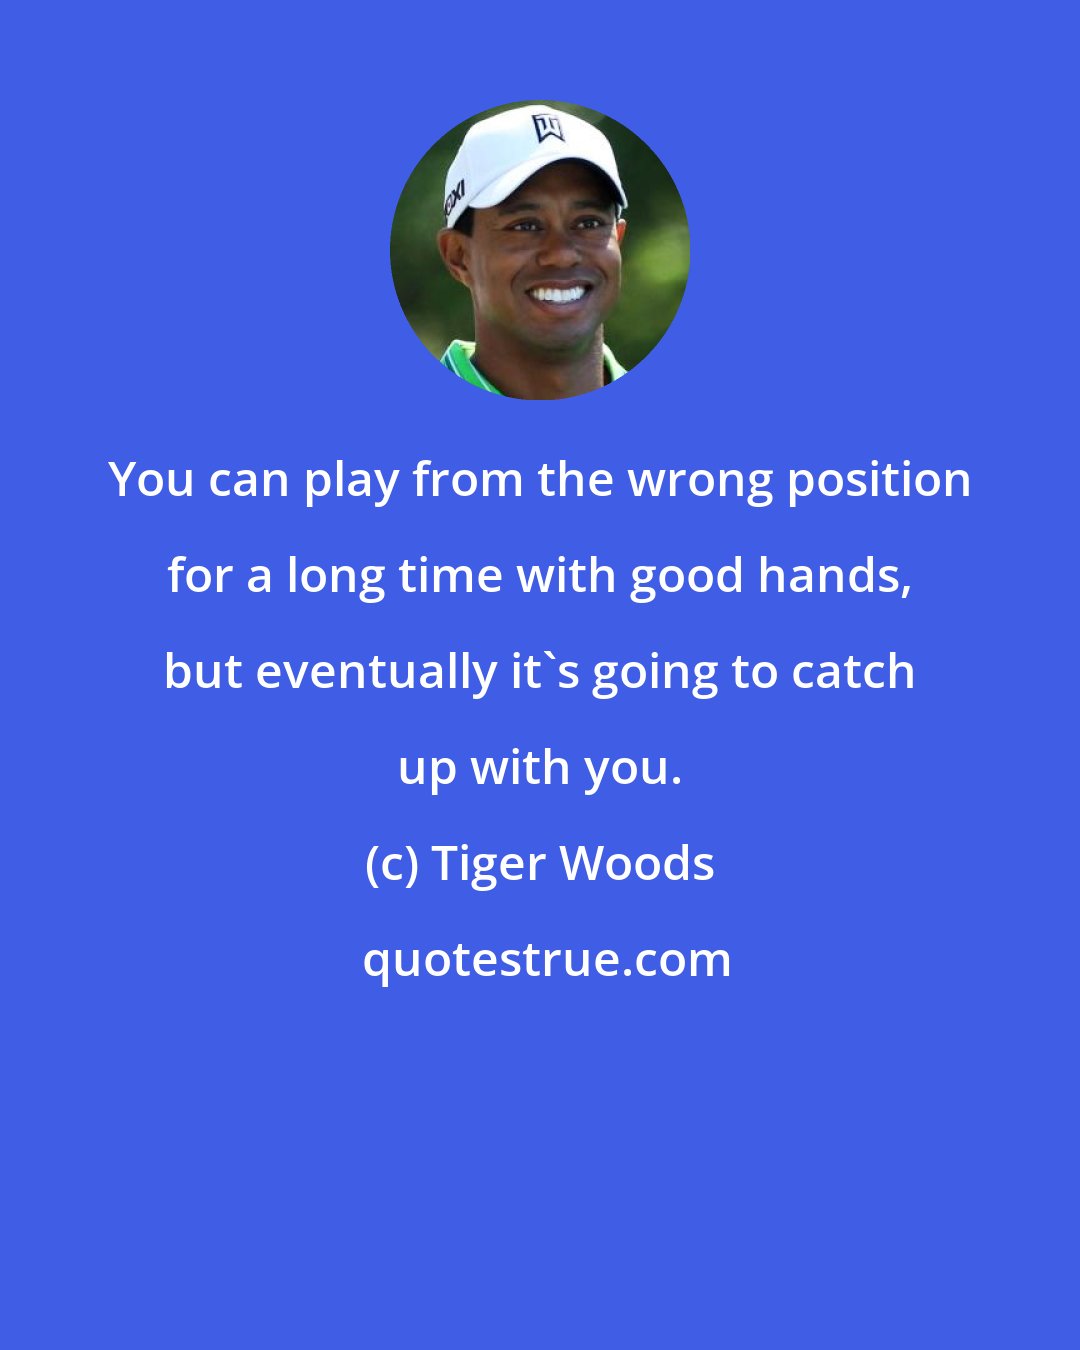 Tiger Woods: You can play from the wrong position for a long time with good hands, but eventually it's going to catch up with you.